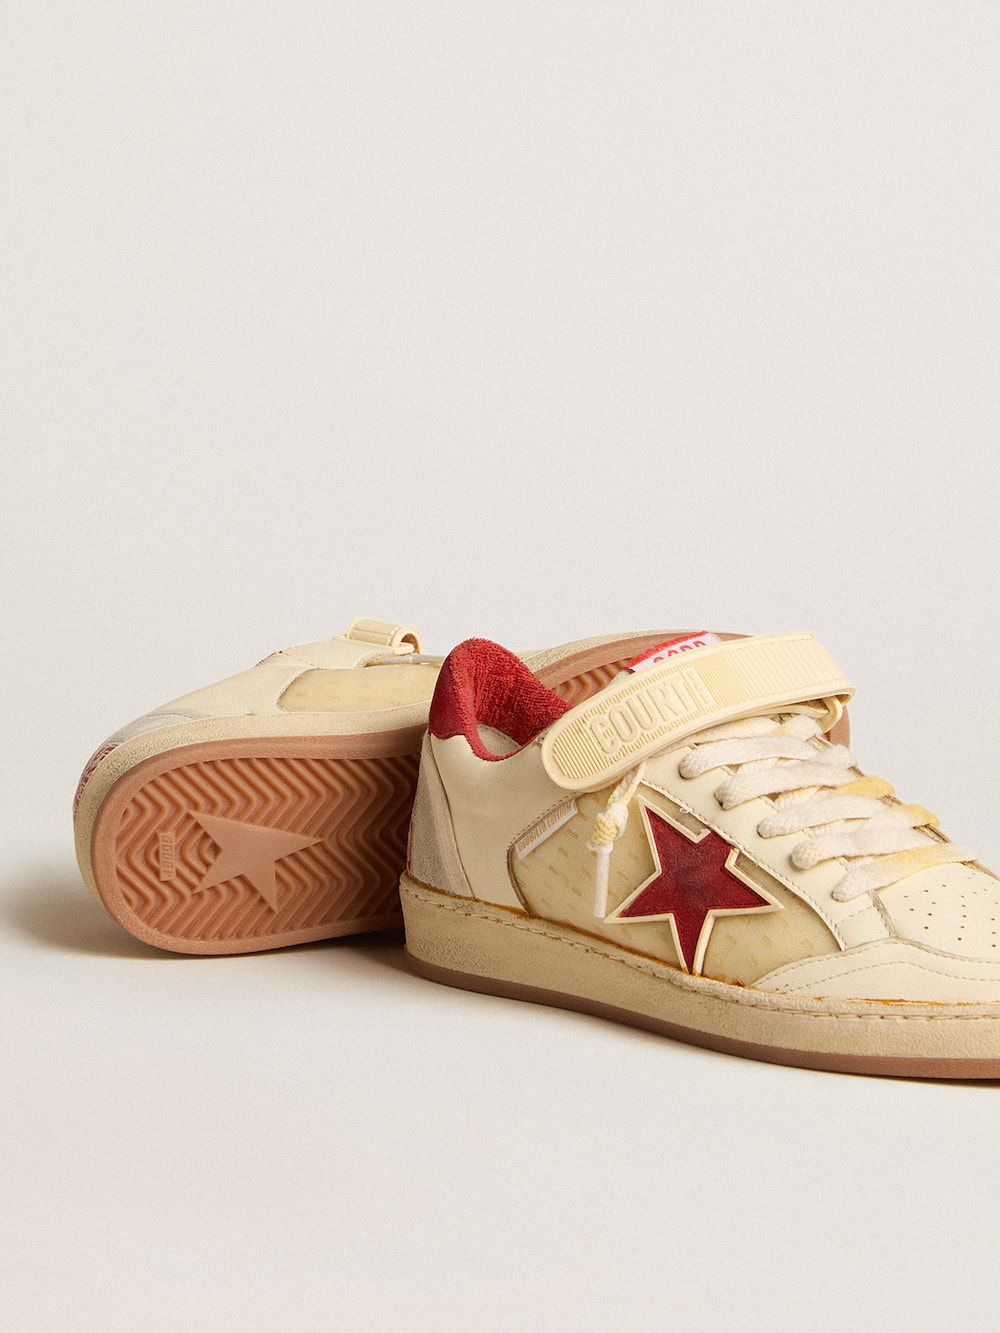 Golden Goose - Women’s Ball Star LAB in cream-colored nappa with red suede star in 